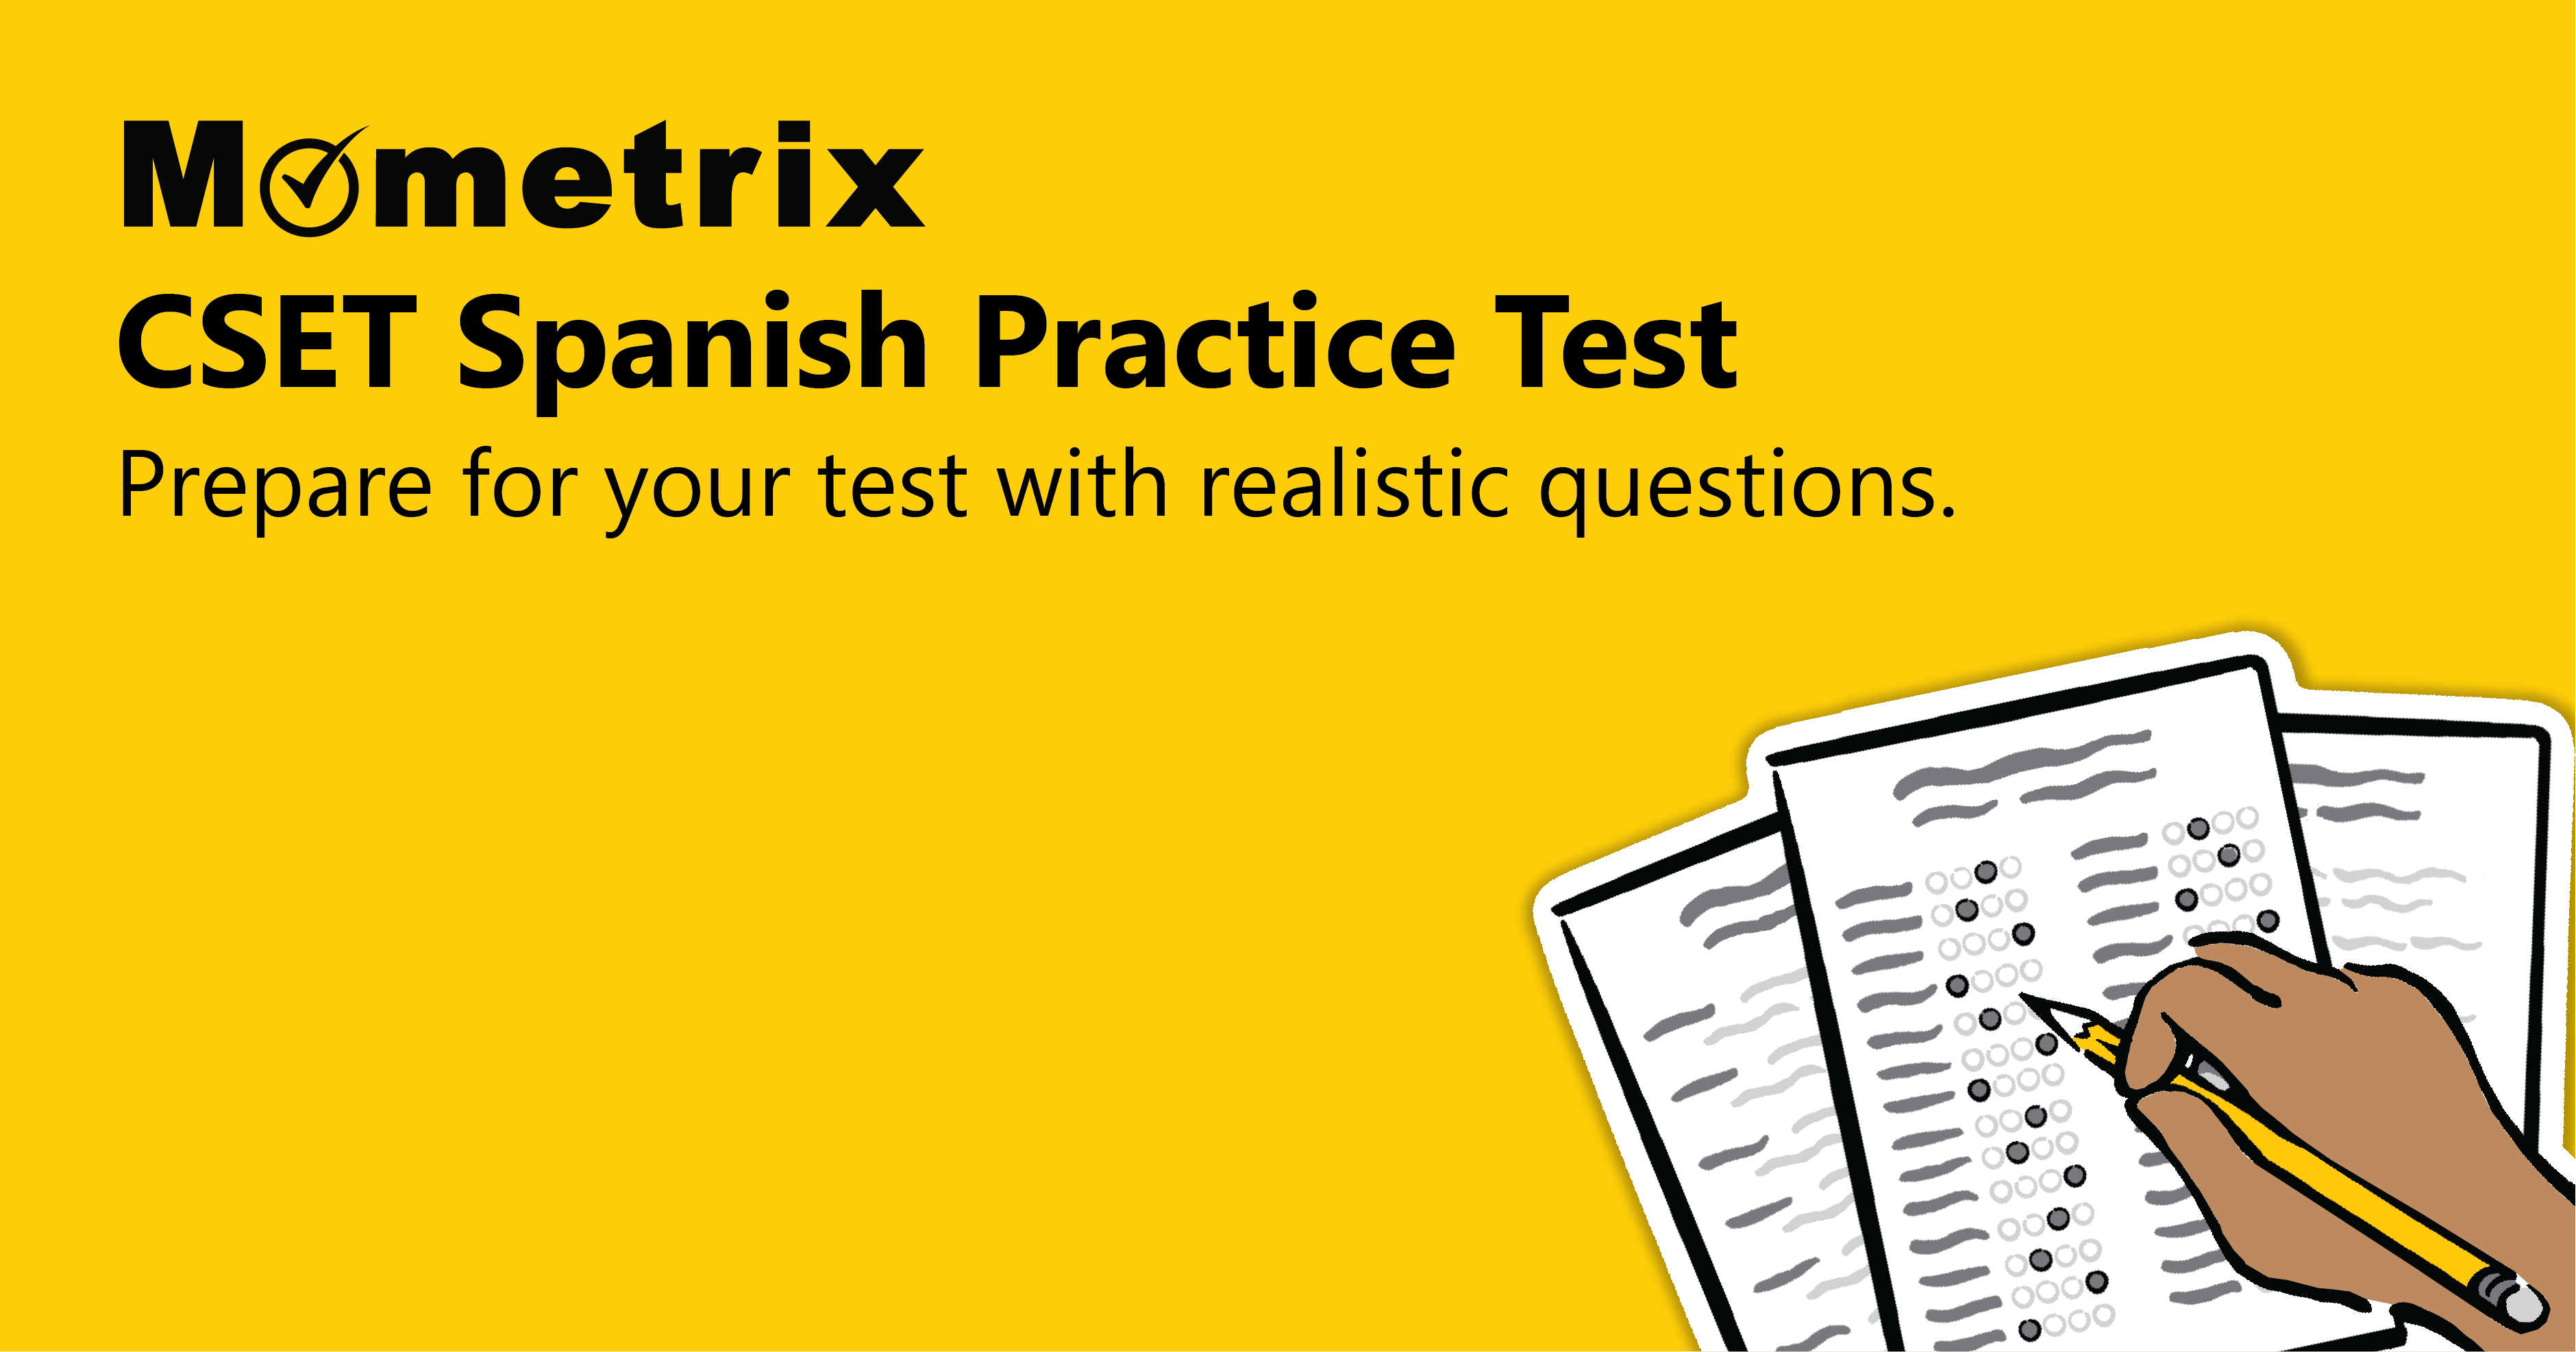 Yellow background with text: "Mometrix CSET Spanish Practice Test. Prepare for your test with realistic questions." An illustration of a hand filling out a multiple-choice exam.